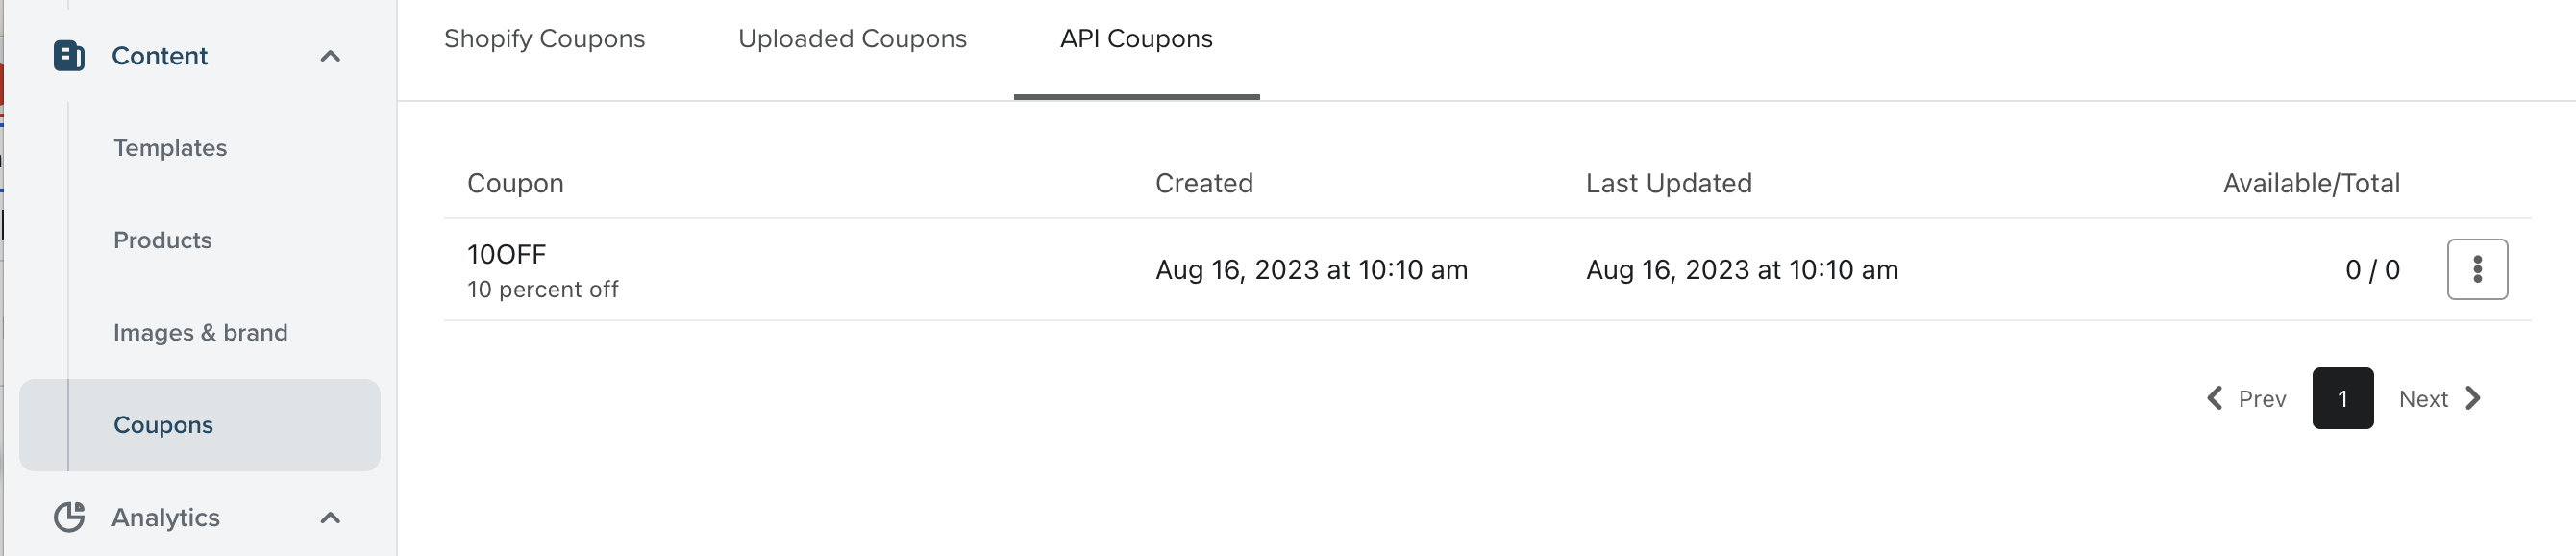 Screen capture a API coupon created via API located in the API Coupons tab under Content > Coupons